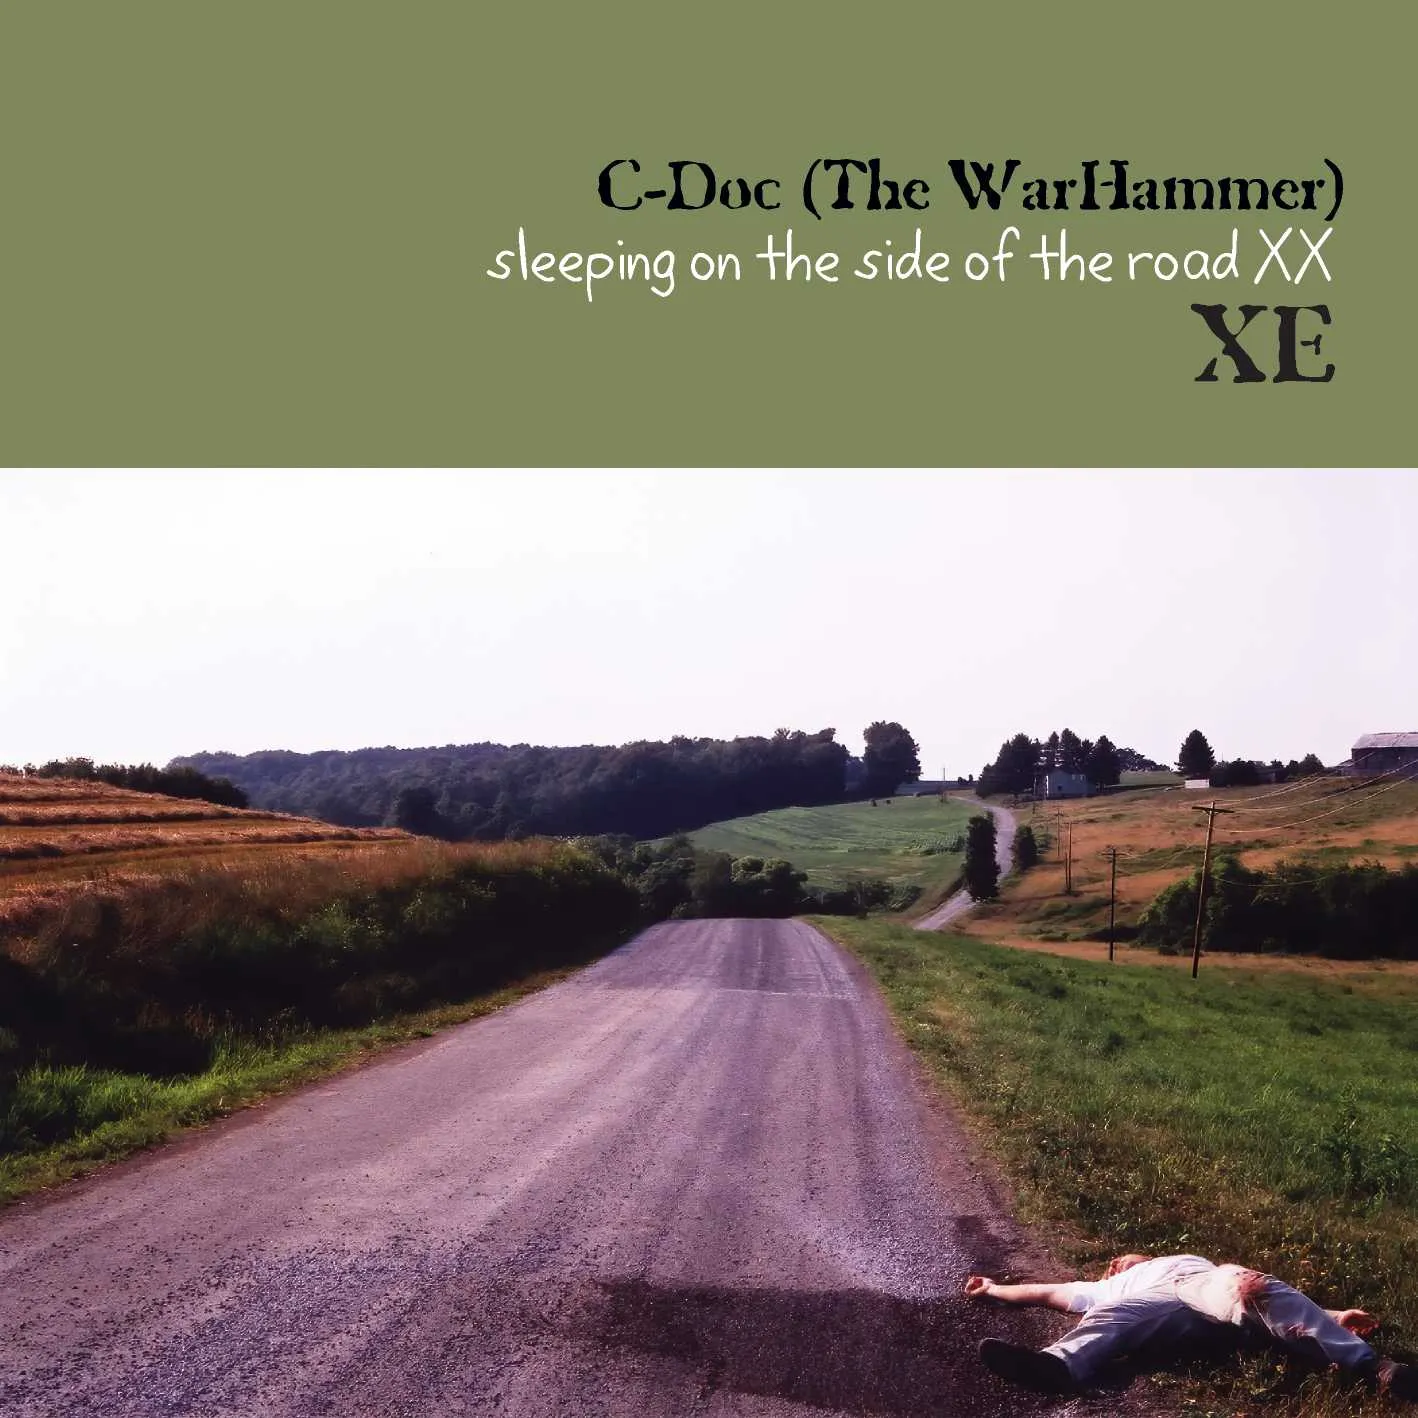 Album cover for “Sleeping On The Side Of The Road XX XE” by C-Doc